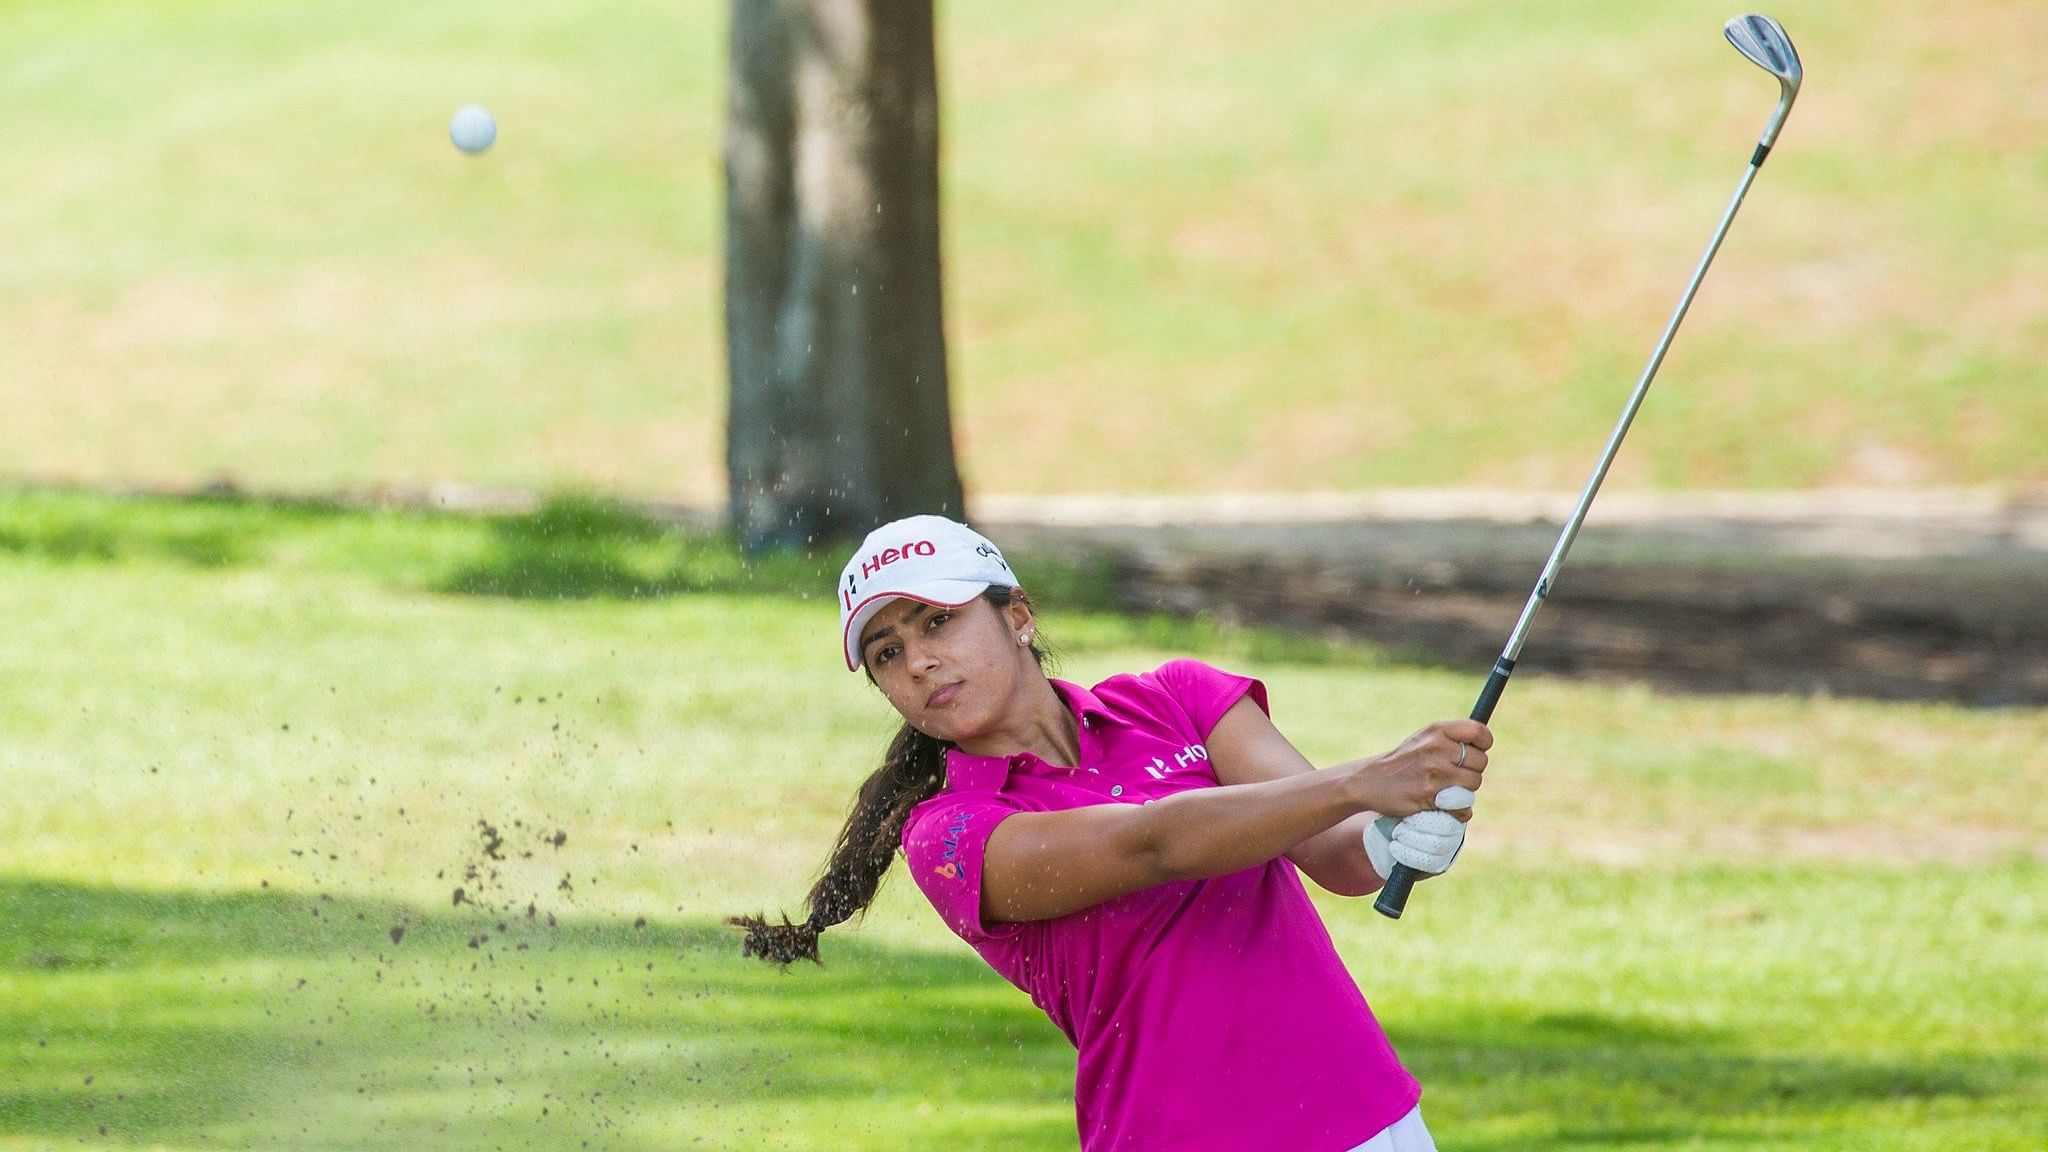 After turning pro in 2017 and making her LET debut in 2019, golfer Tvesa Malik won her first international title by clinching the Super Sport Ladies Challenge on the Sunshine Tour in South Africa recently.  